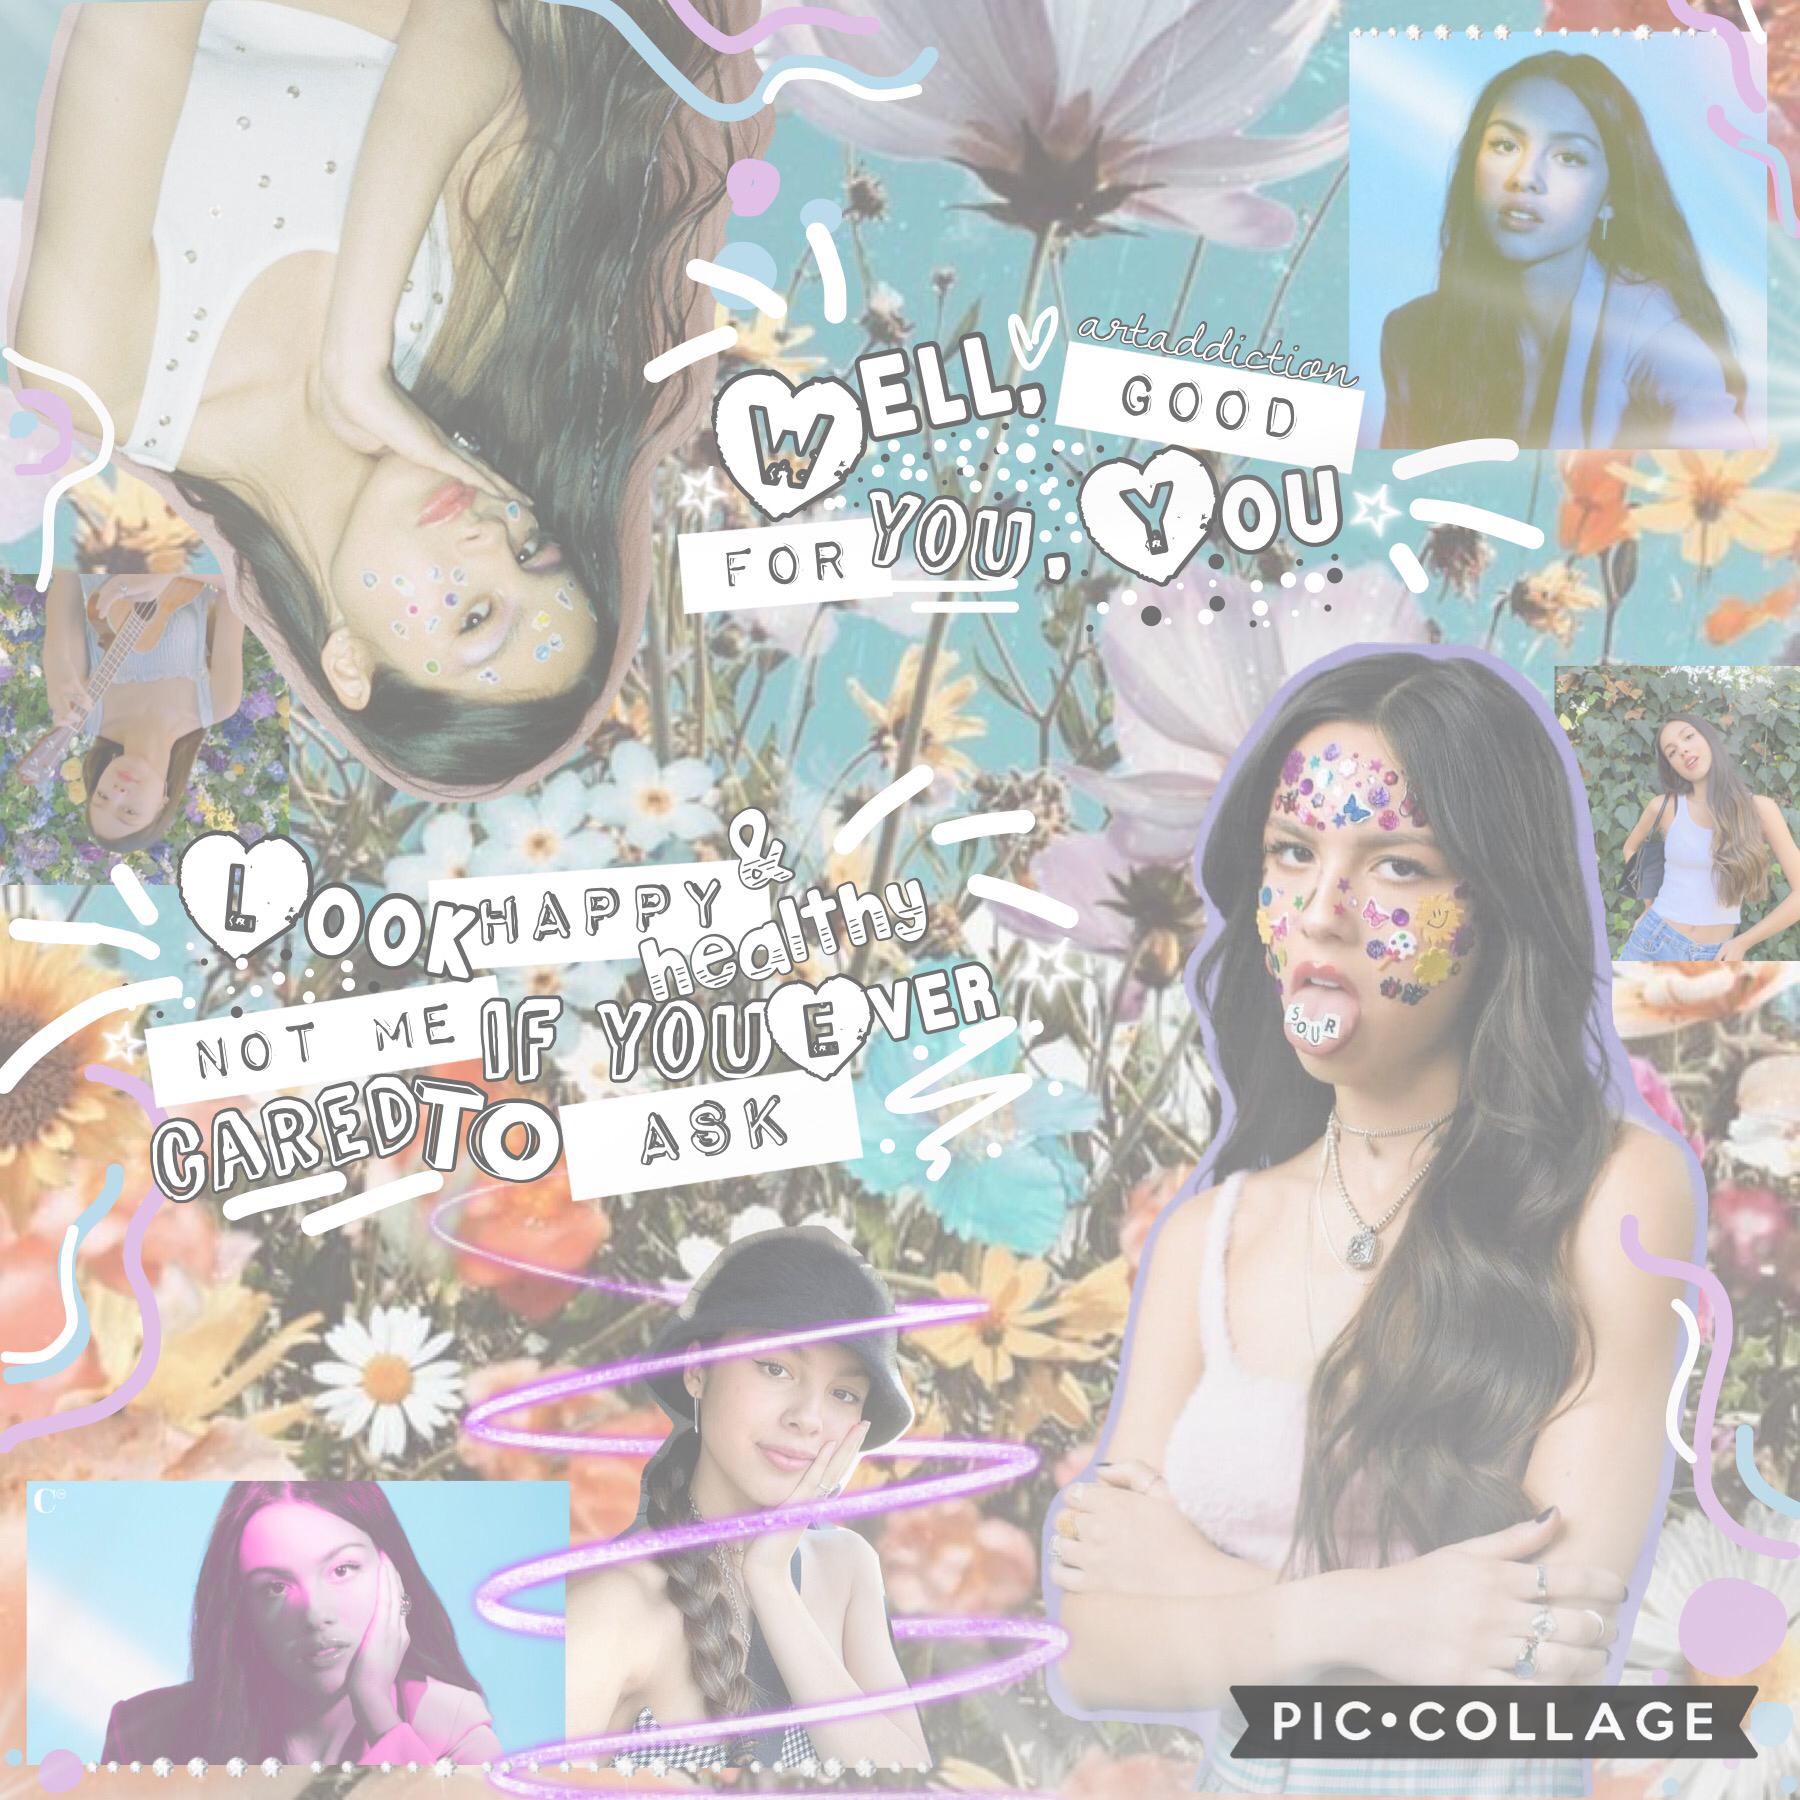 Sorry pc had a glitch it might be a little blurry anyways hruuu guys new billie eilish happier than ever collage coming soon 😆✨